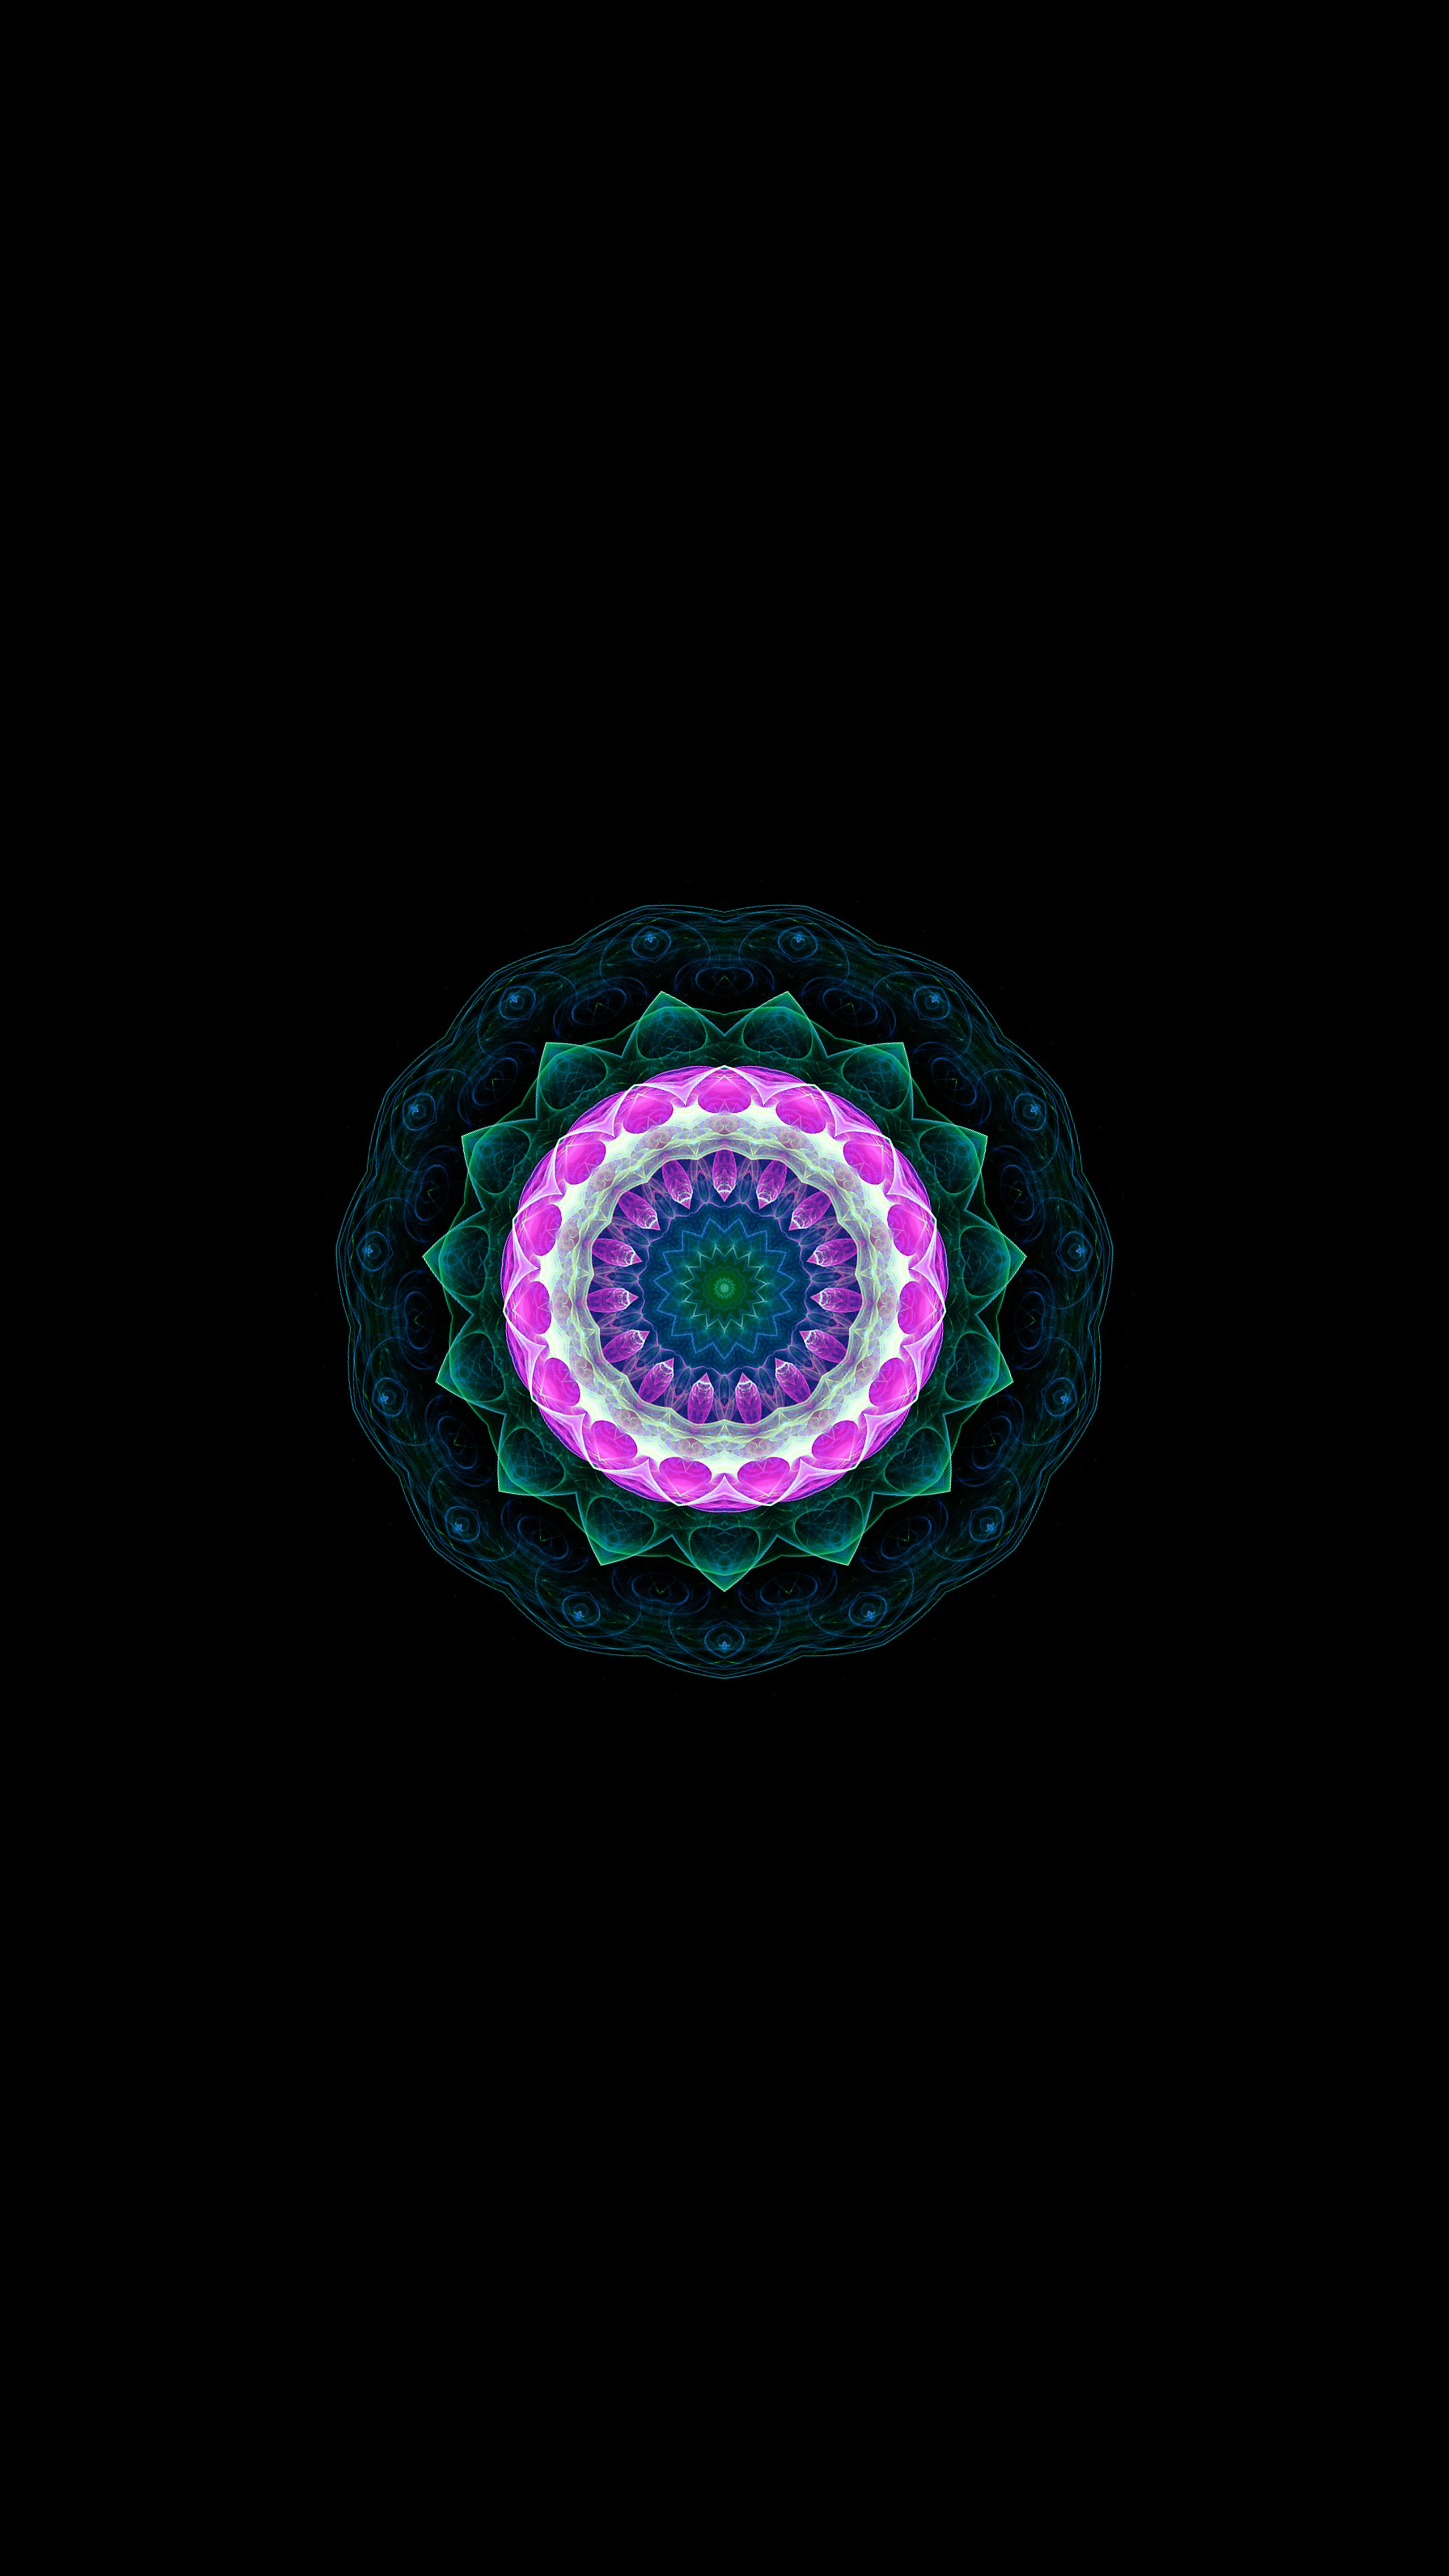 75325 Screensavers and Wallpapers Mandala for phone. Download patterns, miscellanea, miscellaneous, fractal, mandala pictures for free